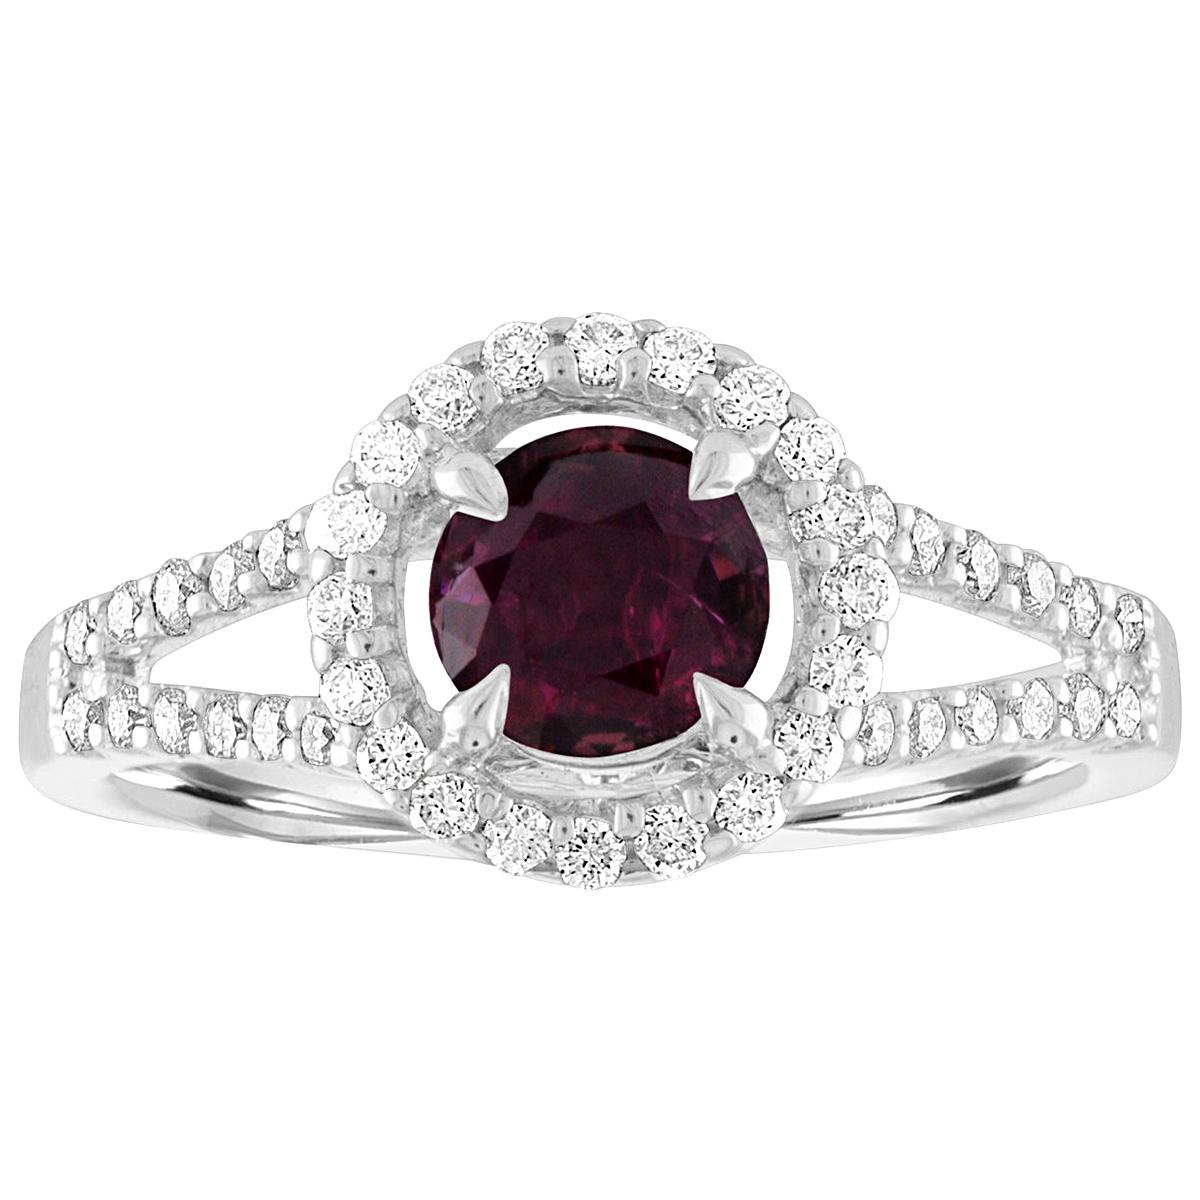 AGL Certified 1.00 Carat Round Ruby Diamond Gold Ring